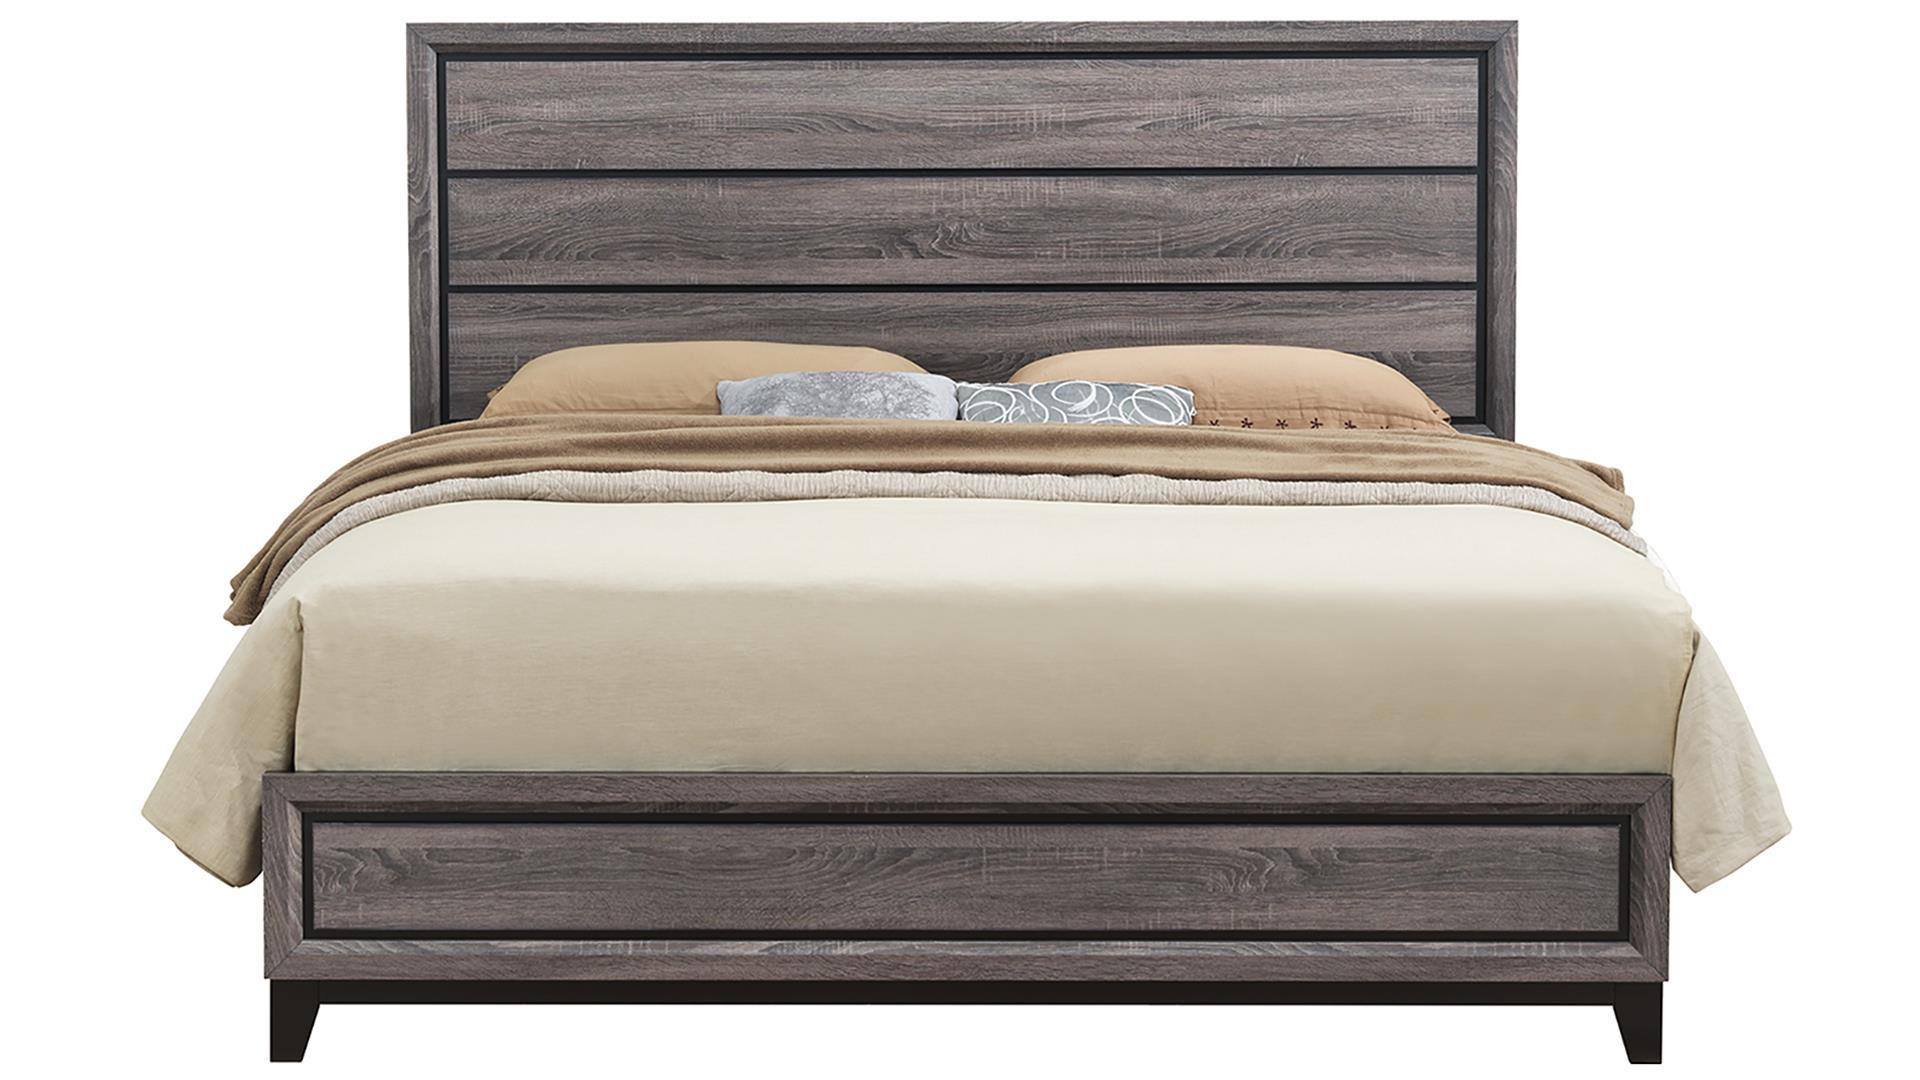 

    
KATE Beach Wood Grey Finish Casual Queen Size Bed Global US
